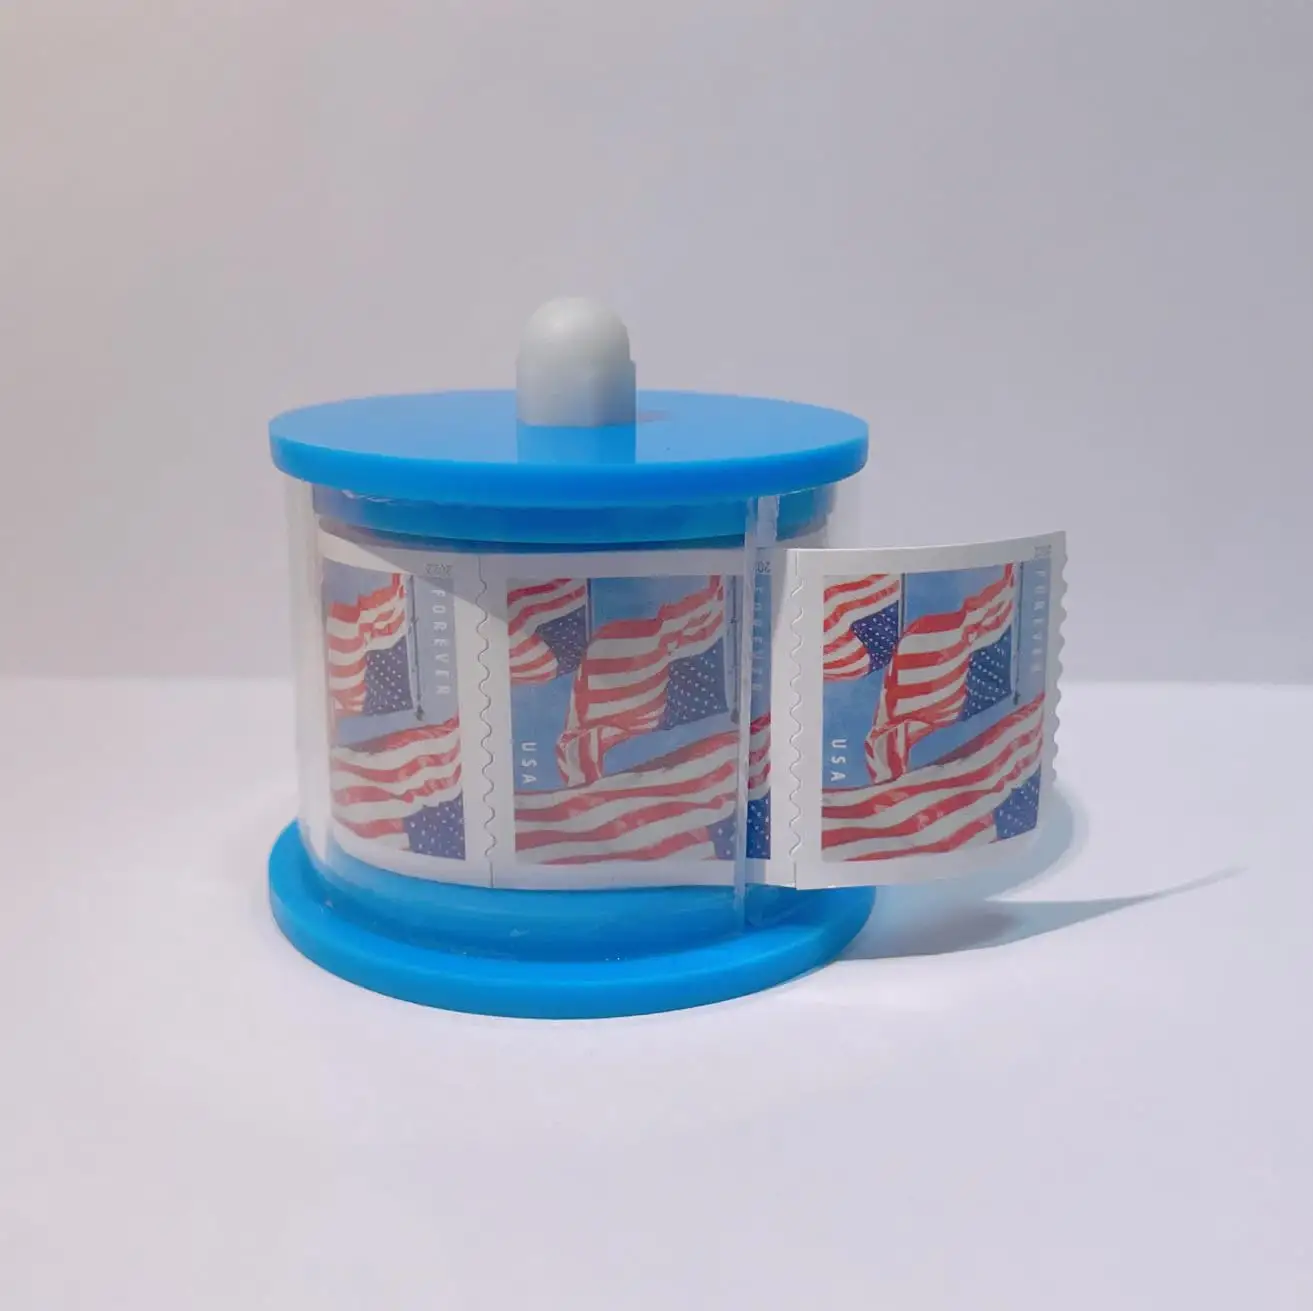 New Design American Stamps Postage Dispenser Roll of 100 US Forever Stamp Convenient and Stylish